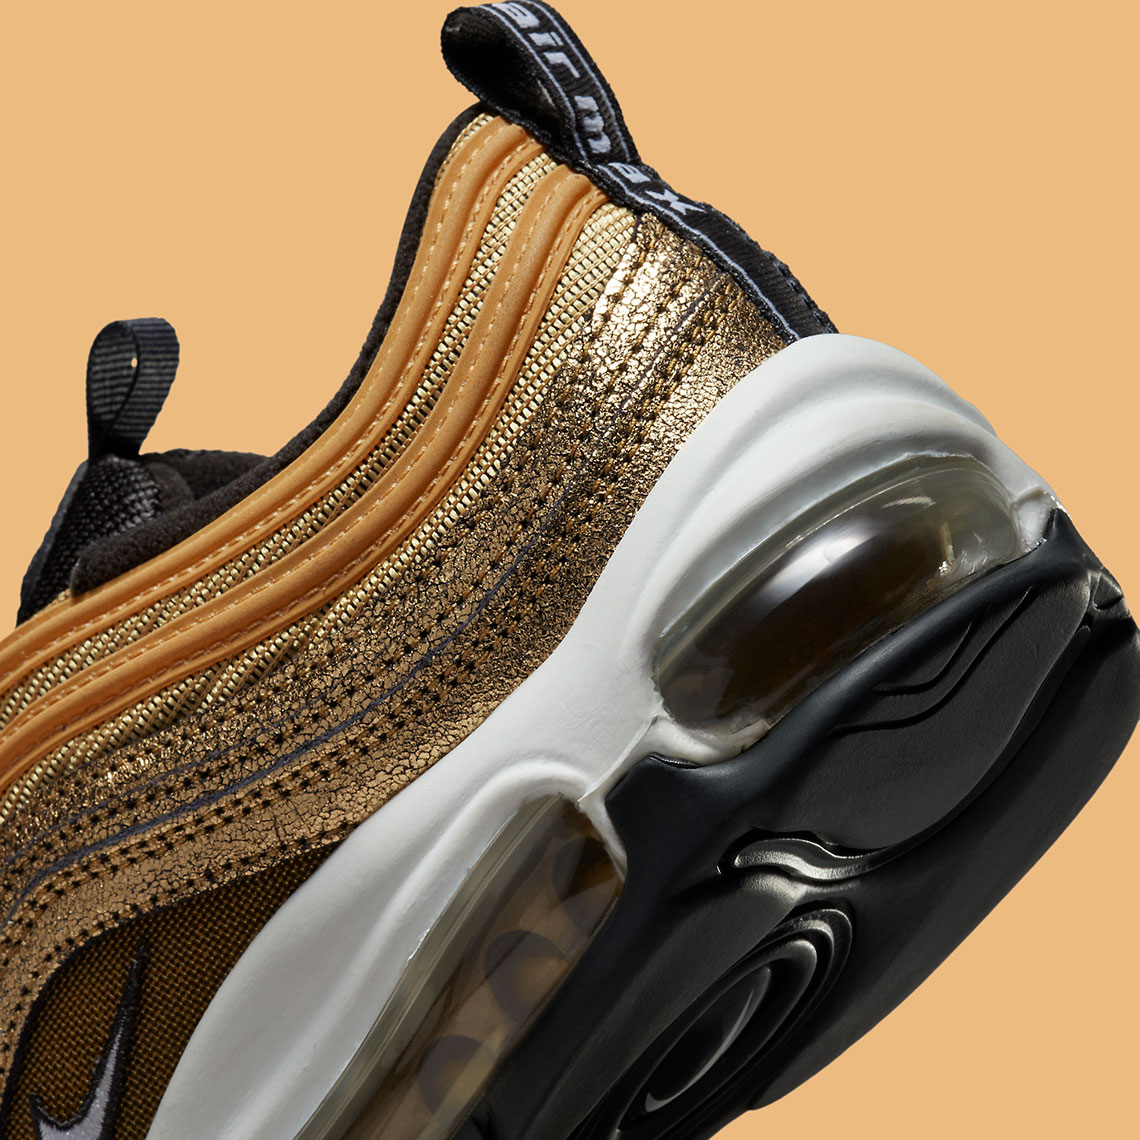 Nike Air Max 97 Cracked Gold Do5881 700 6